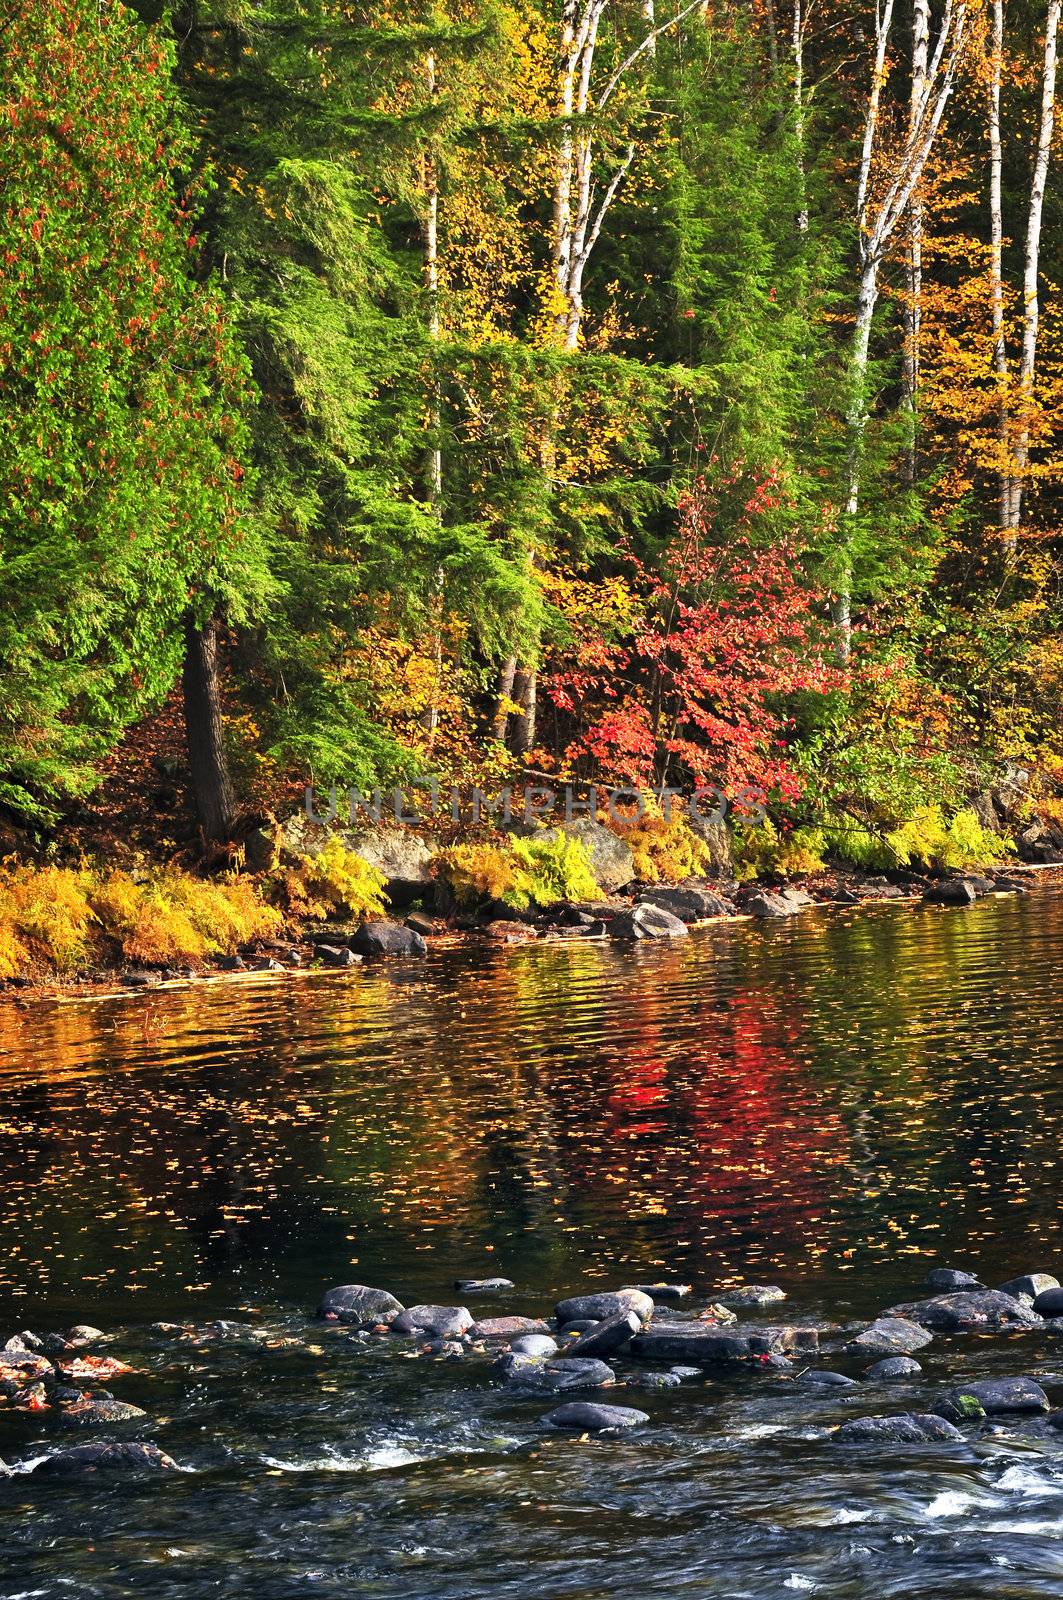 Lake shore of fall forest with colorful reflections